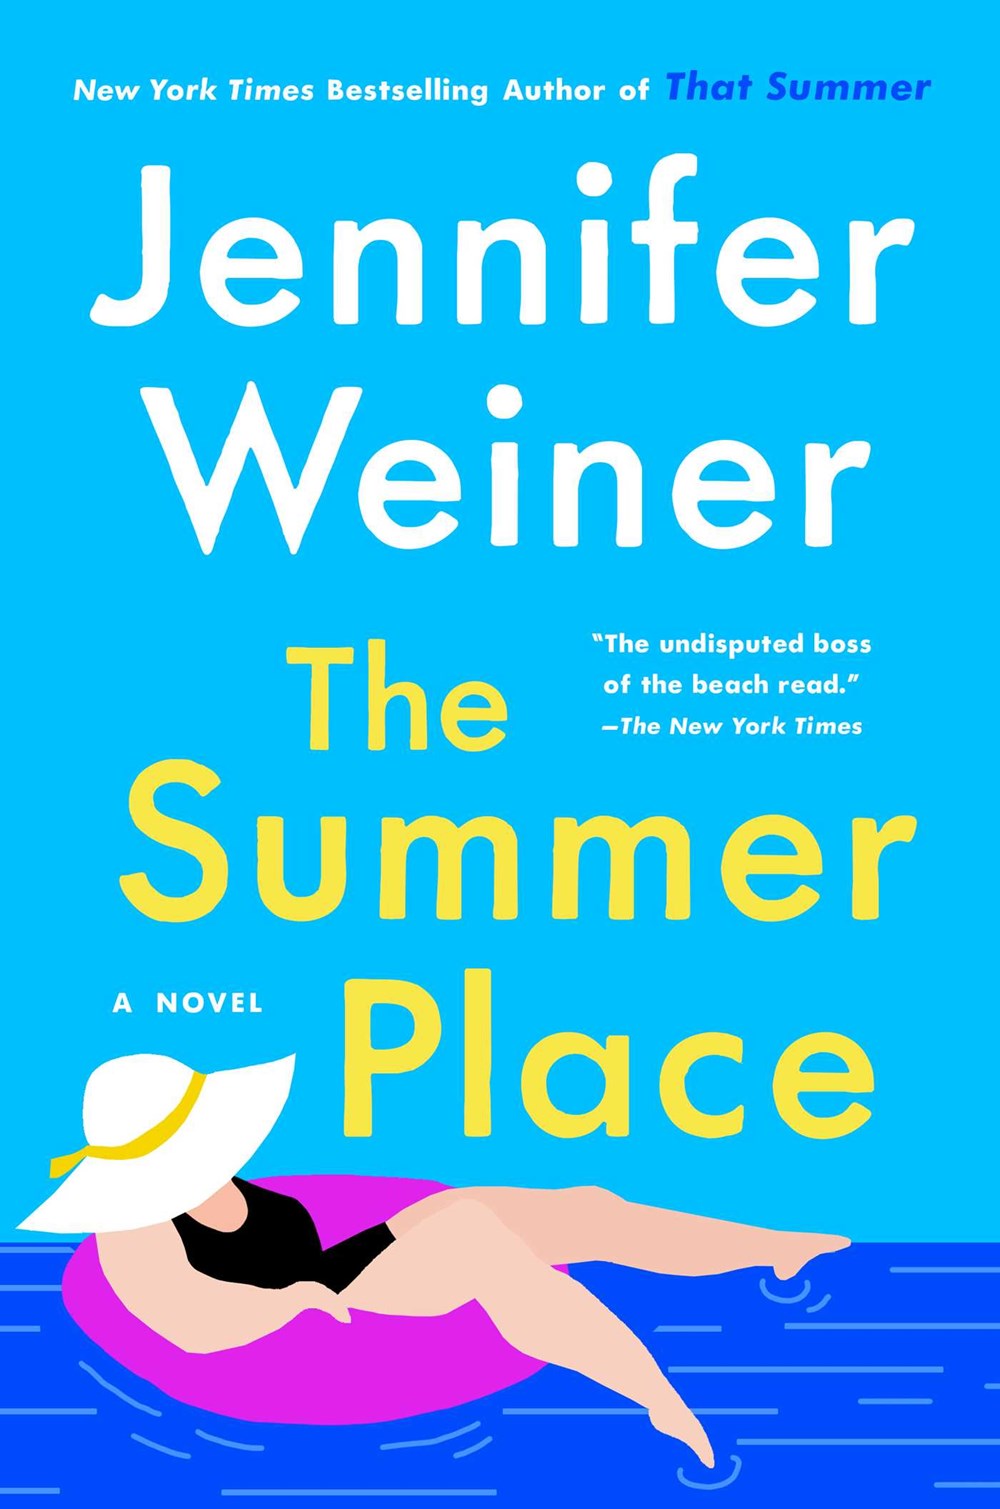 Image for "The Summer Place"